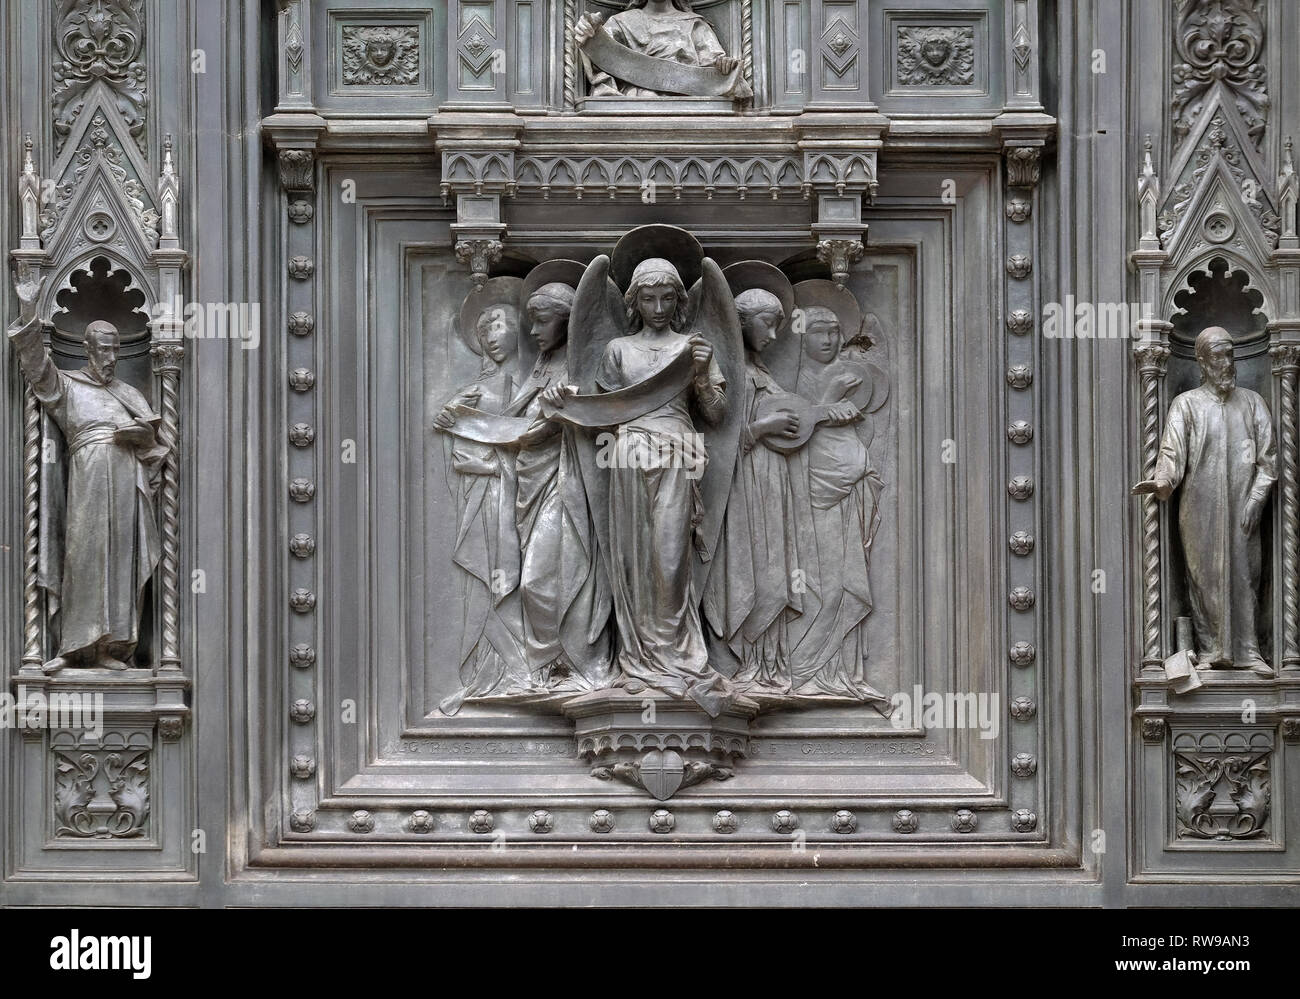 Detail of door of Cattedrale di Santa Maria del Fiore (Cathedral of Saint Mary of the Flower), Florence, Italy Stock Photo